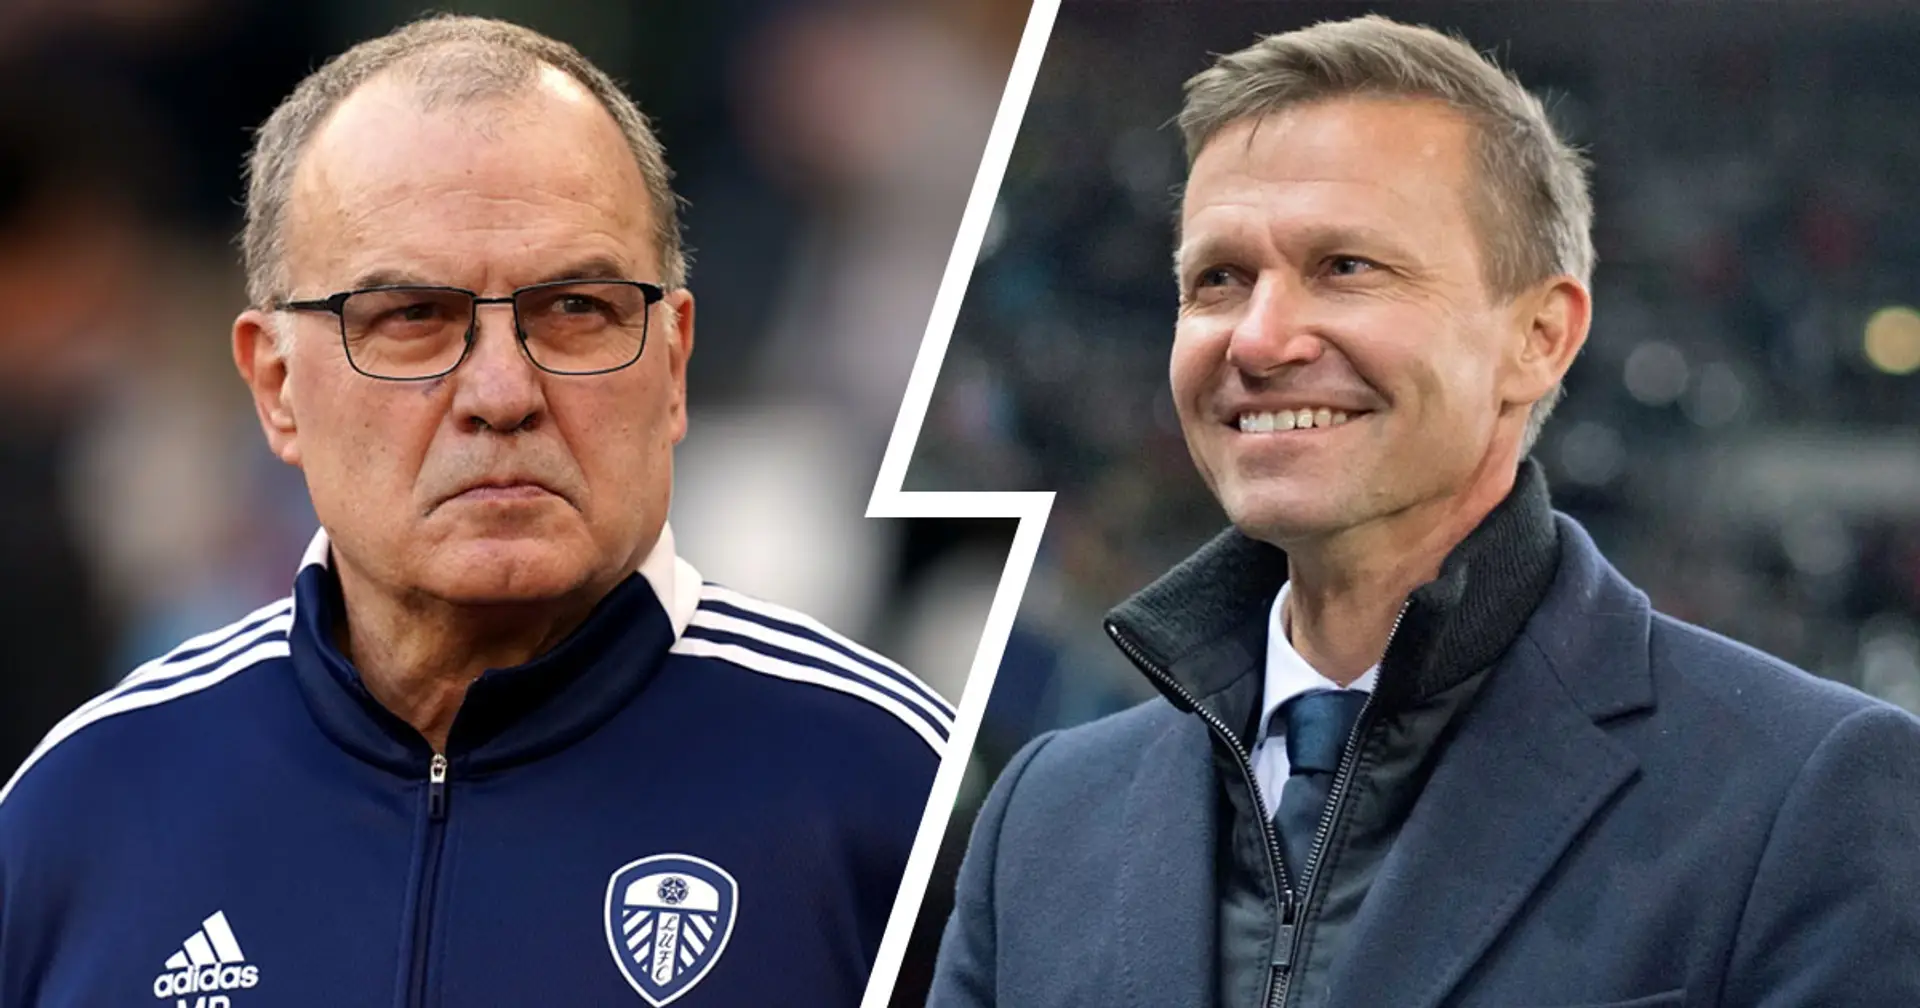 Leeds United 'reach full agreement' with Jesse Marsch to replace Marcelo Bielsa as new manager